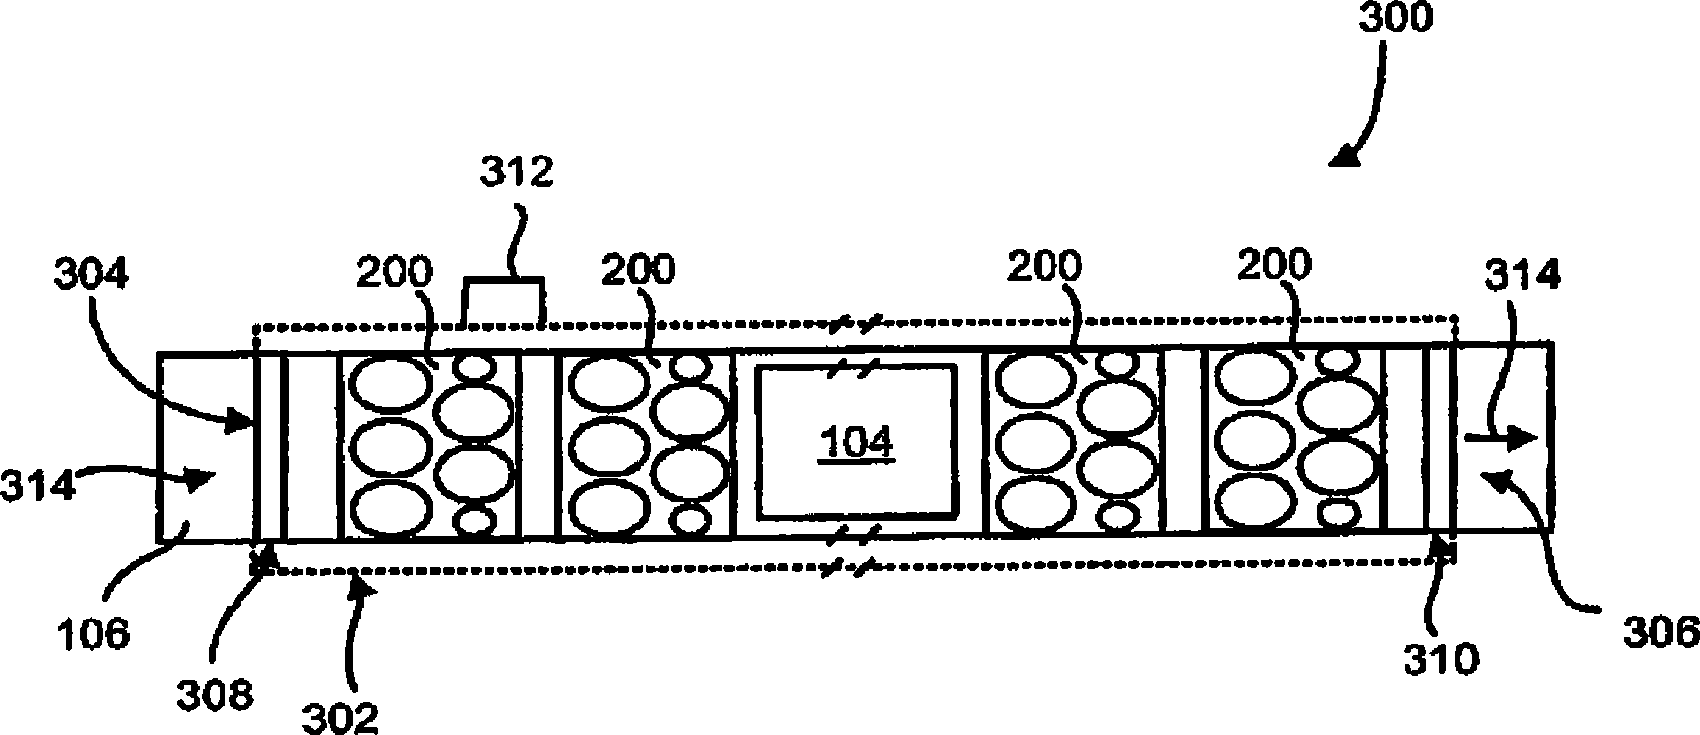 Plasma deposition apparatus and method for making solar cells